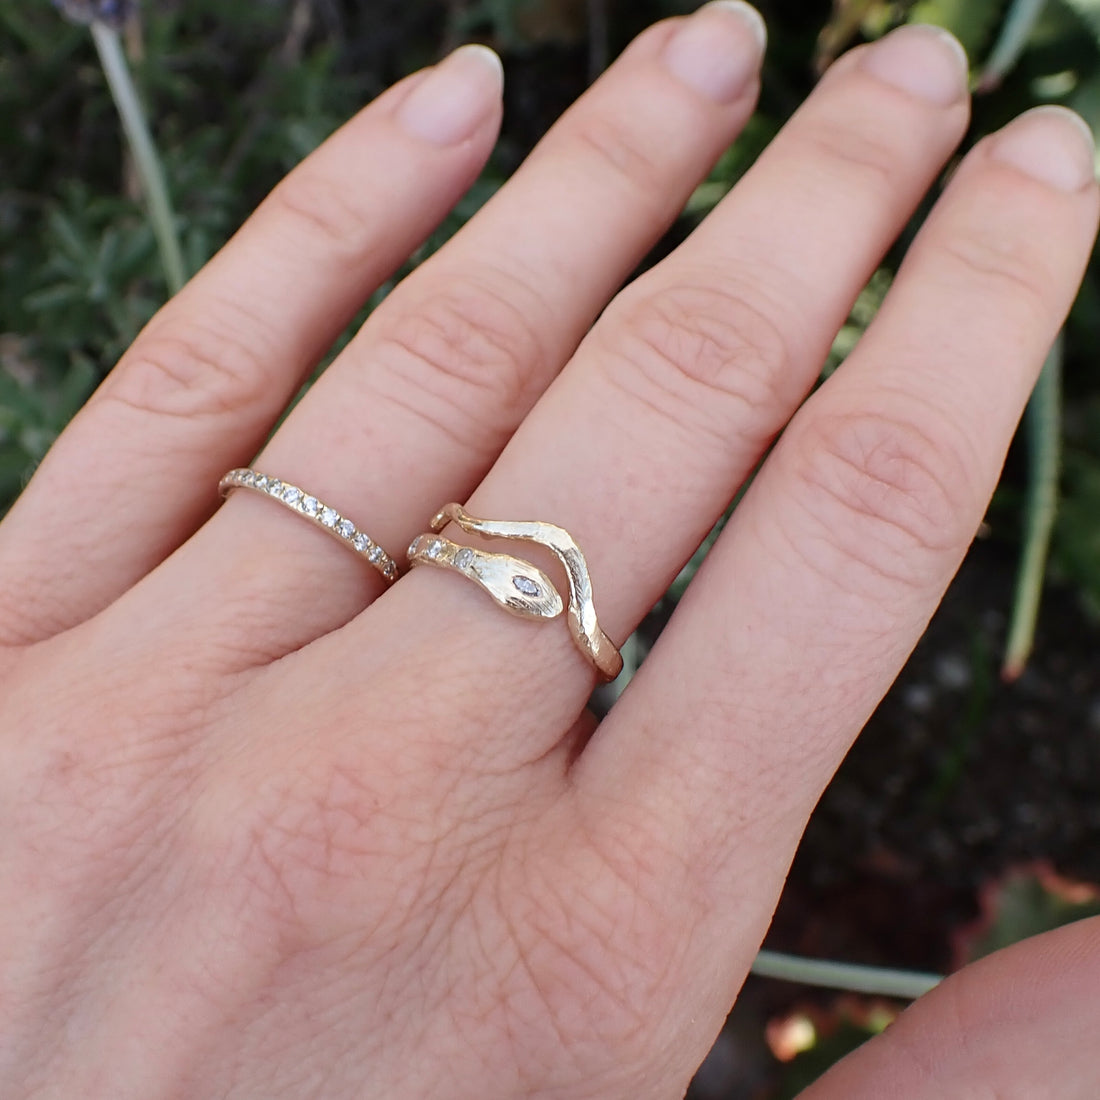 Serpent snake ring, 14k Gold with diamonds - Salt and Pepper Diamond Ring- mossNstone